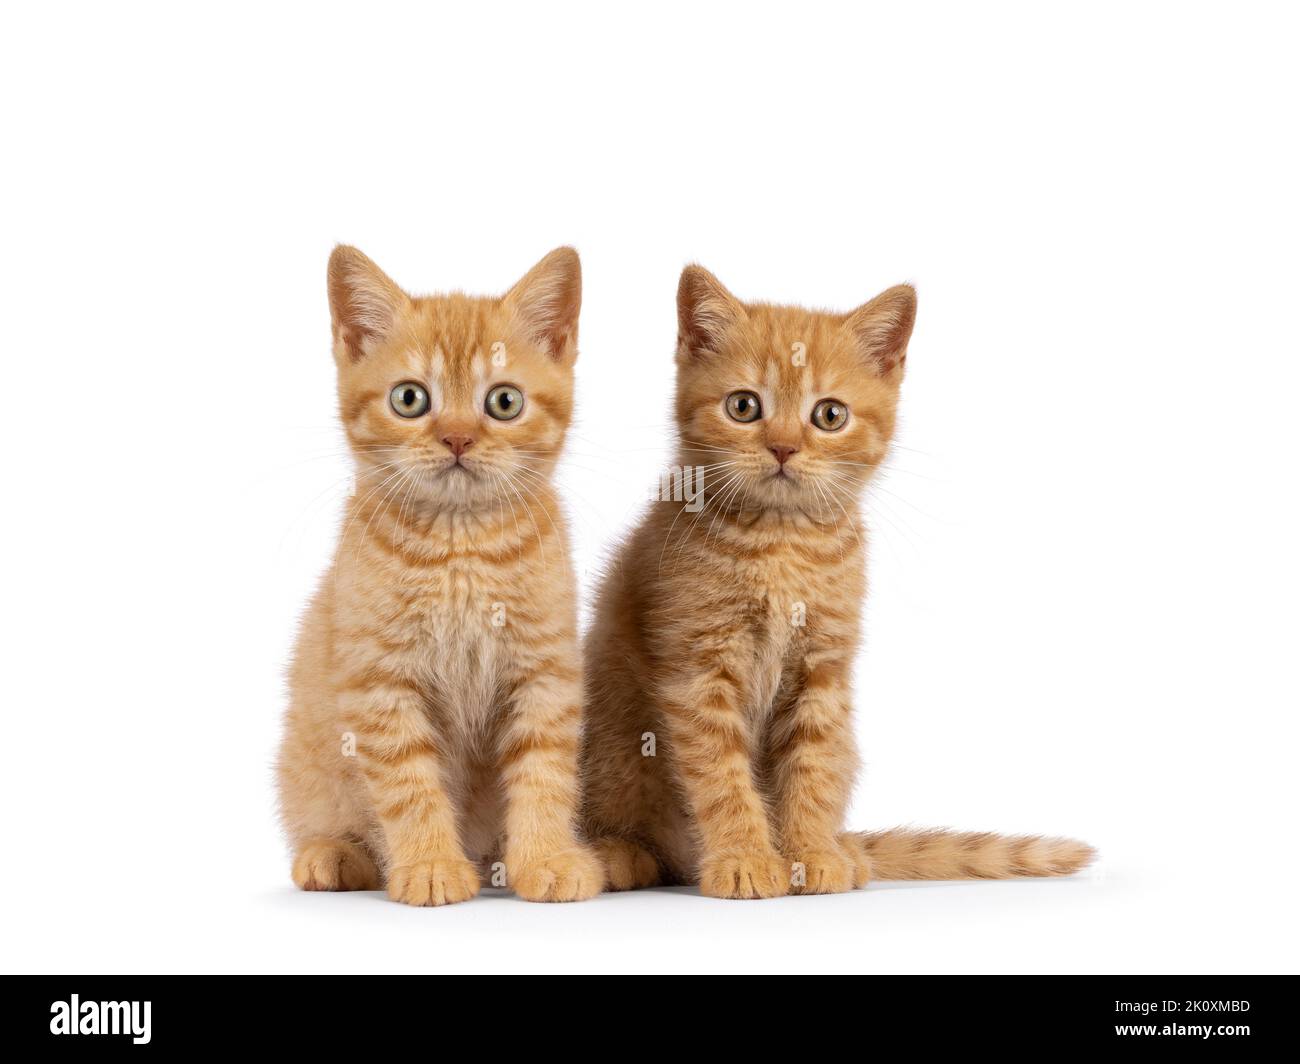 2 Red British Shorthair cat kittens, sitting beside each other facing camara. Both looking straight to camera. Isolated on a white background. Stock Photo